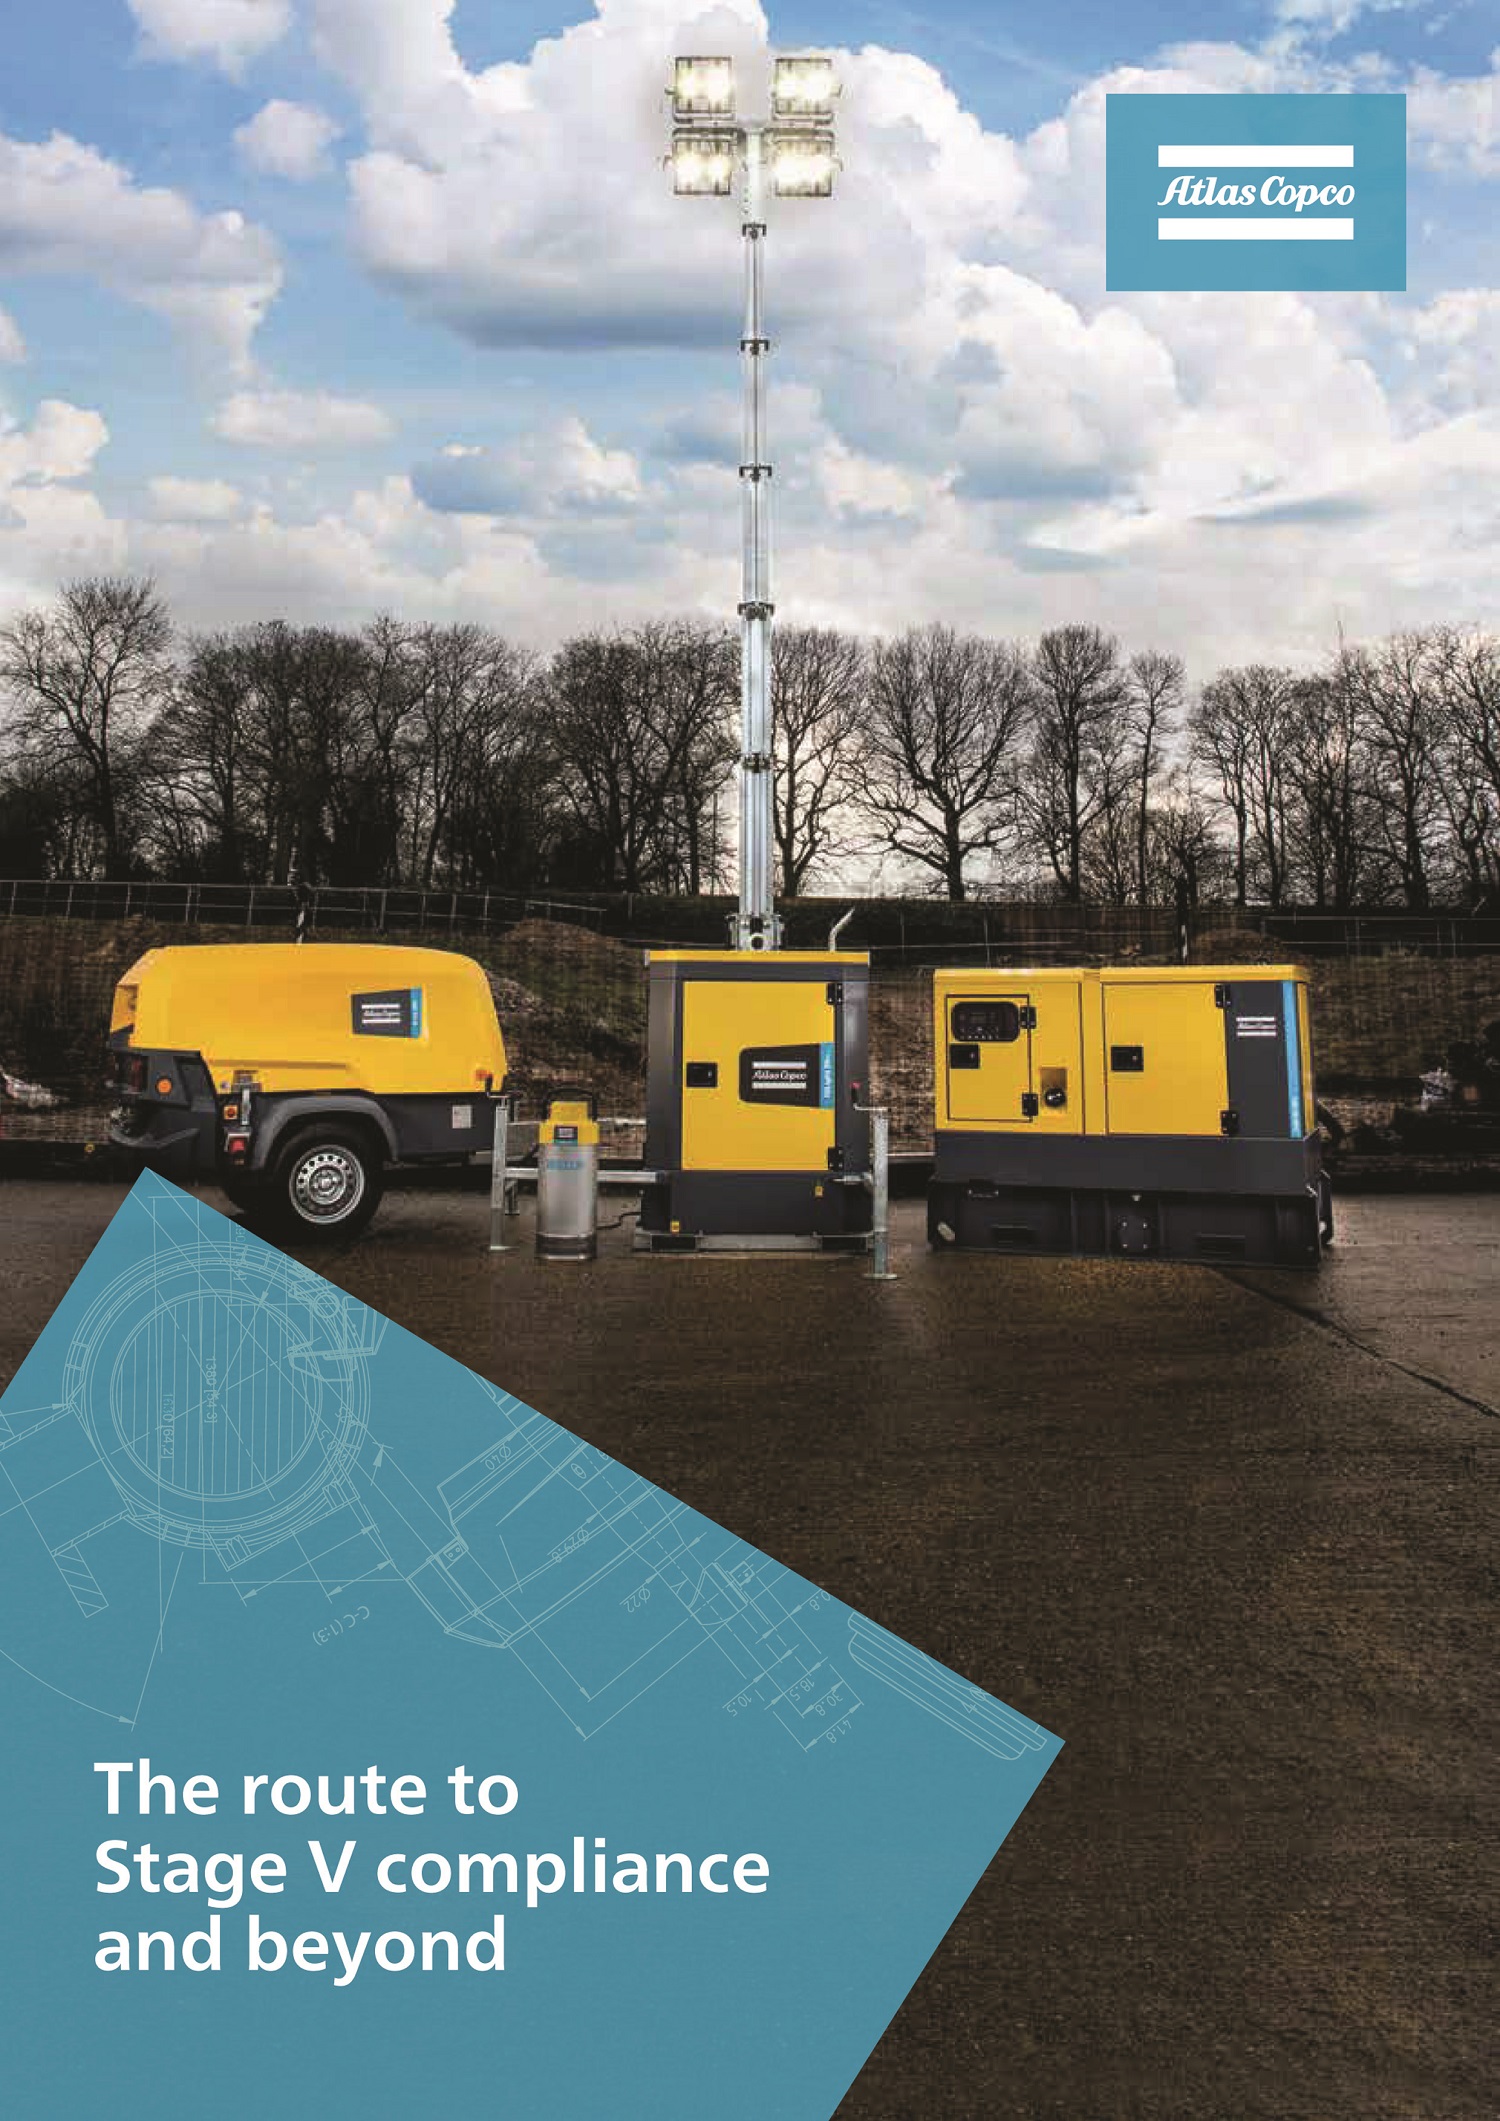 The Atlas Copco guide outlines the scope of the Stage V standards as a means of reducing air pollution.